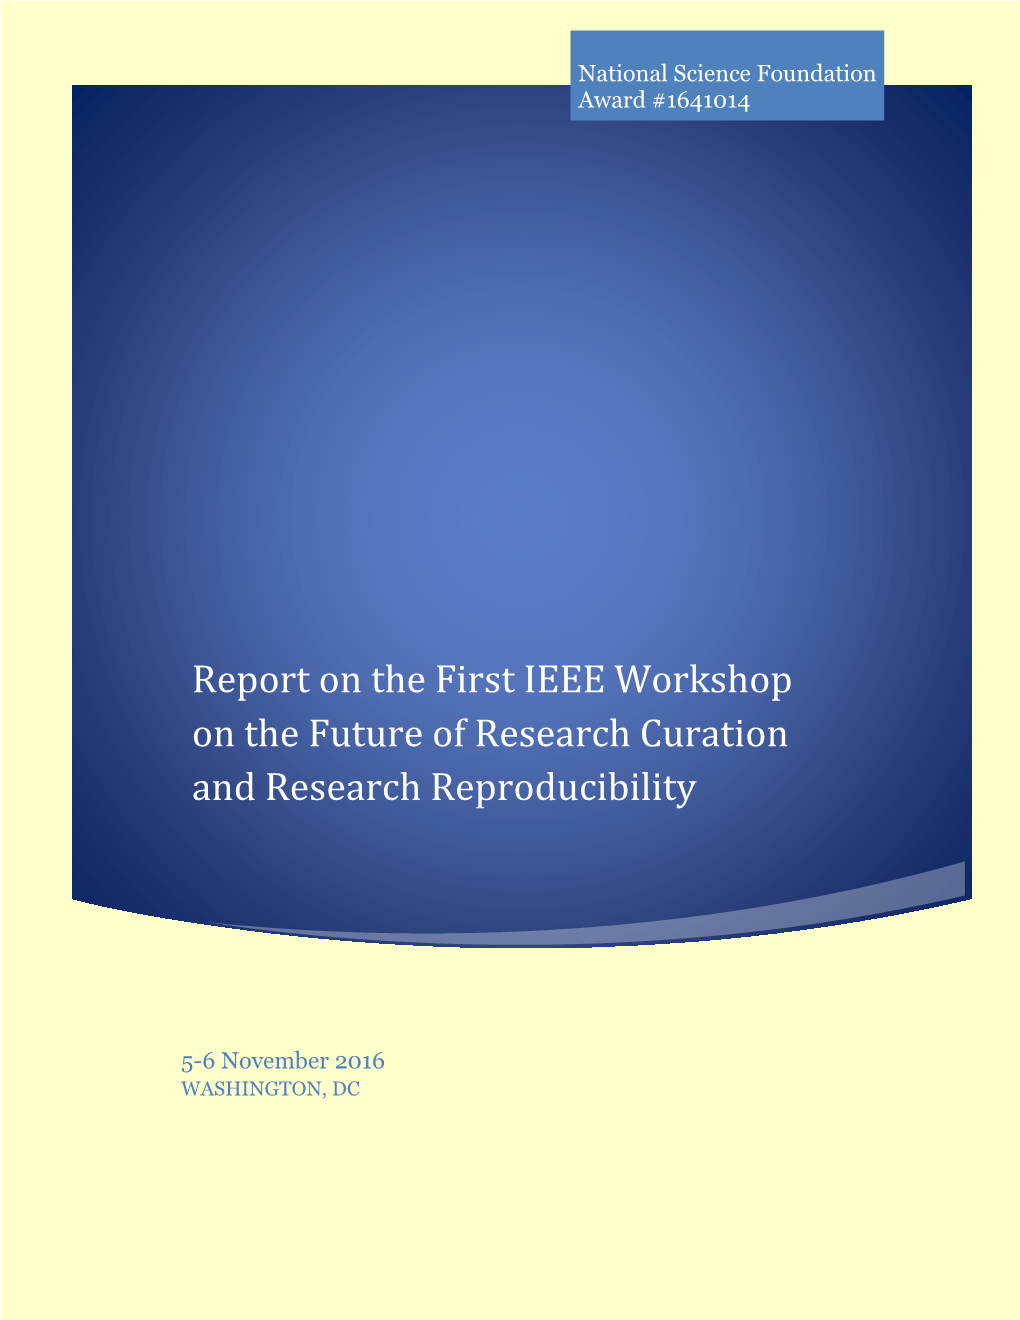 Report on the First IEEE Workshop on the Future of Research Curation Andnational Research Reproducibility Science Foundation 5-6 November 2016 Award #1641014